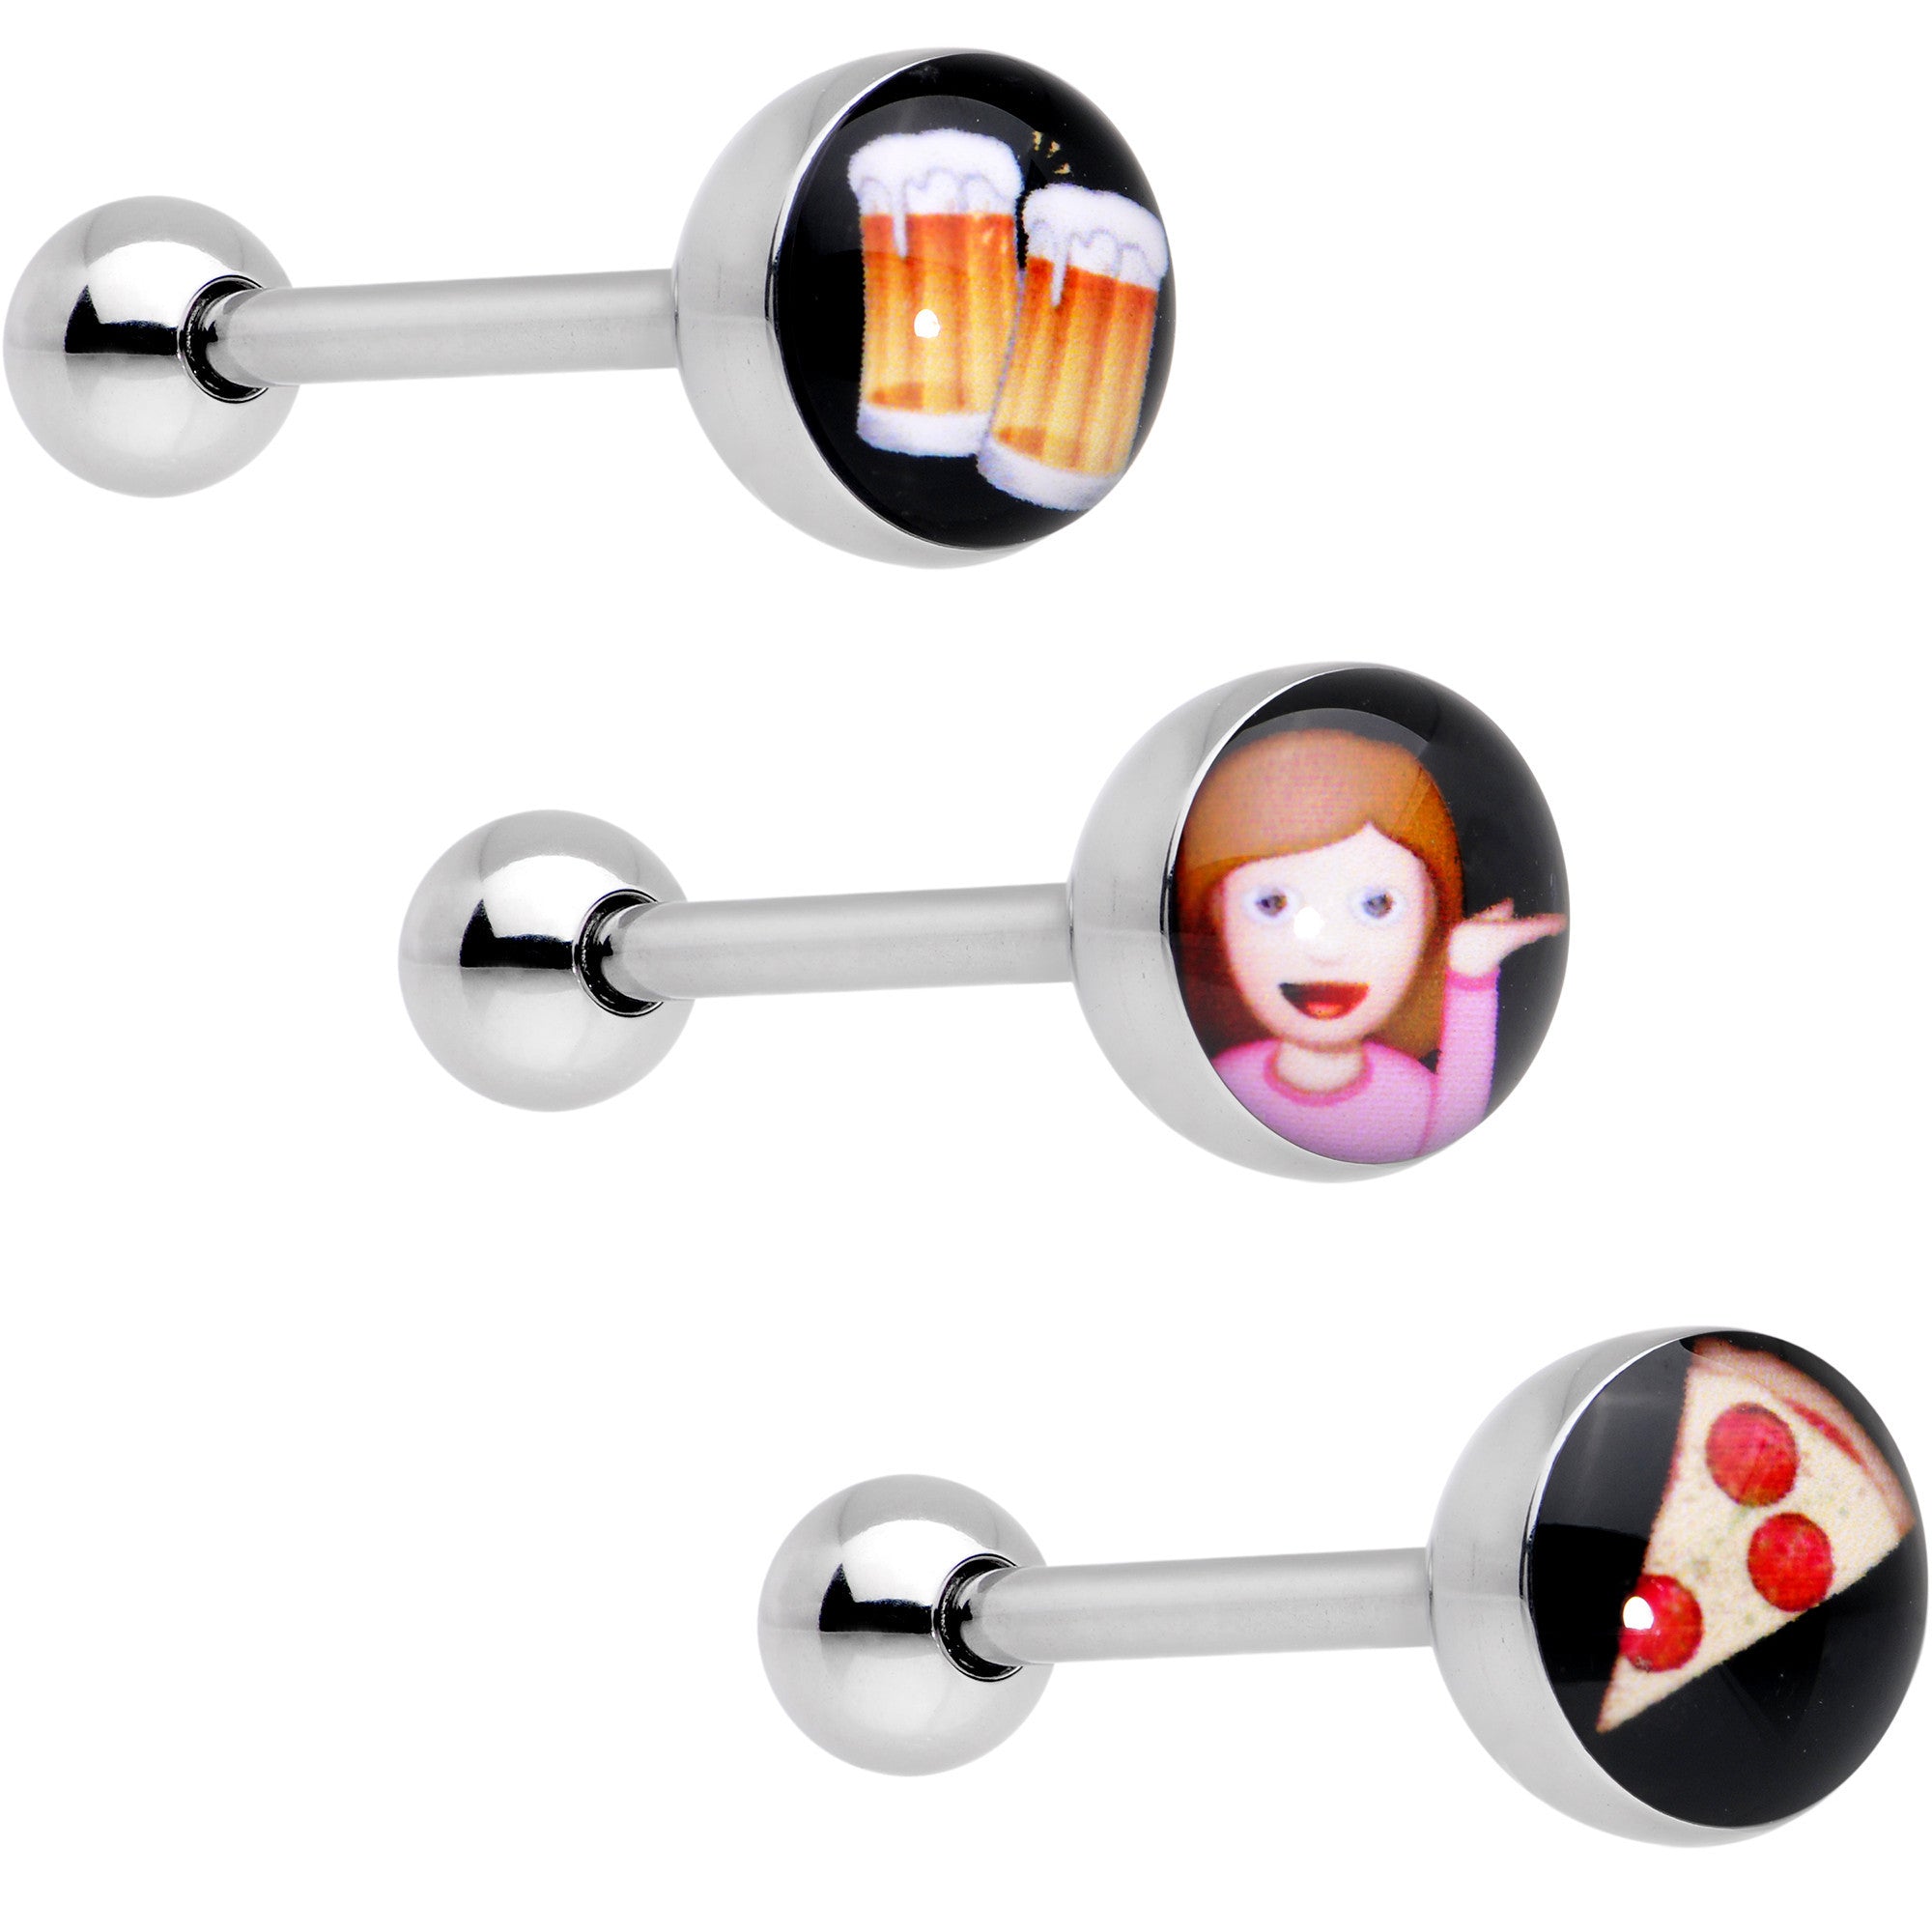 5/8 Licensed Party Pizza Beers Sassy Girl emoji Tongue Ring Set of 3